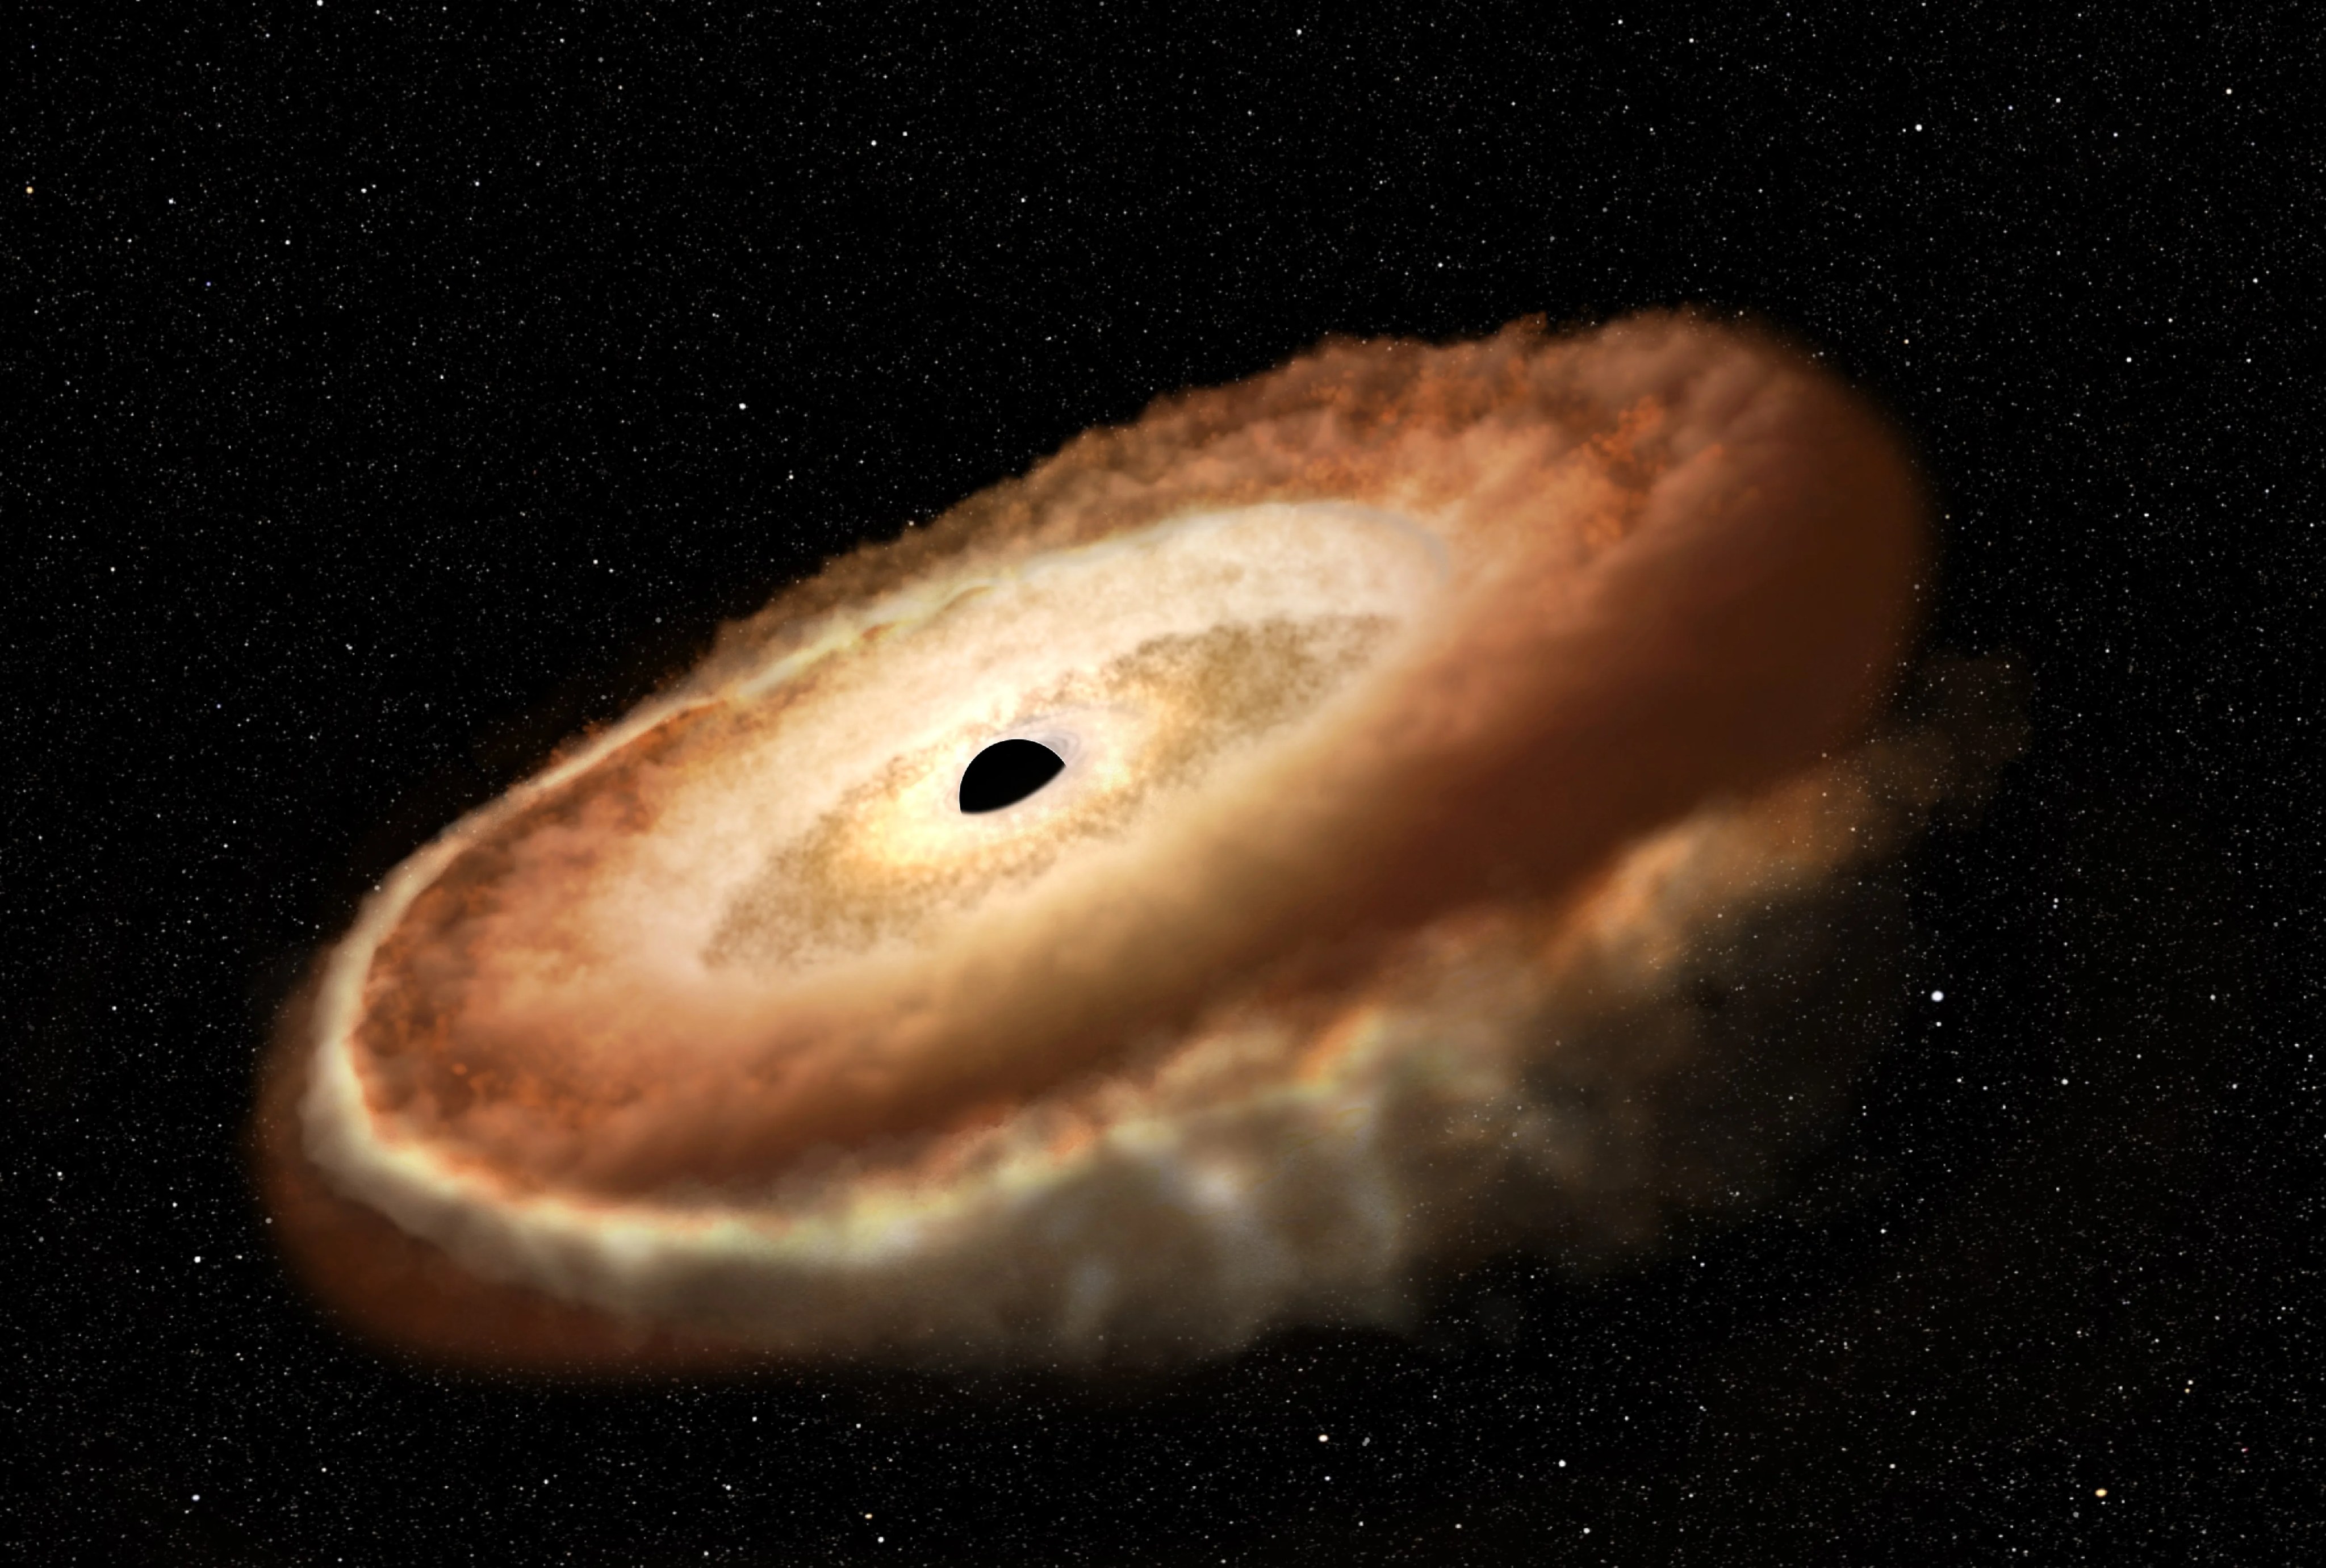 Illustration of a black hole at center of frame, swirling disk of rusty-orange and white gas surrounds the black hole